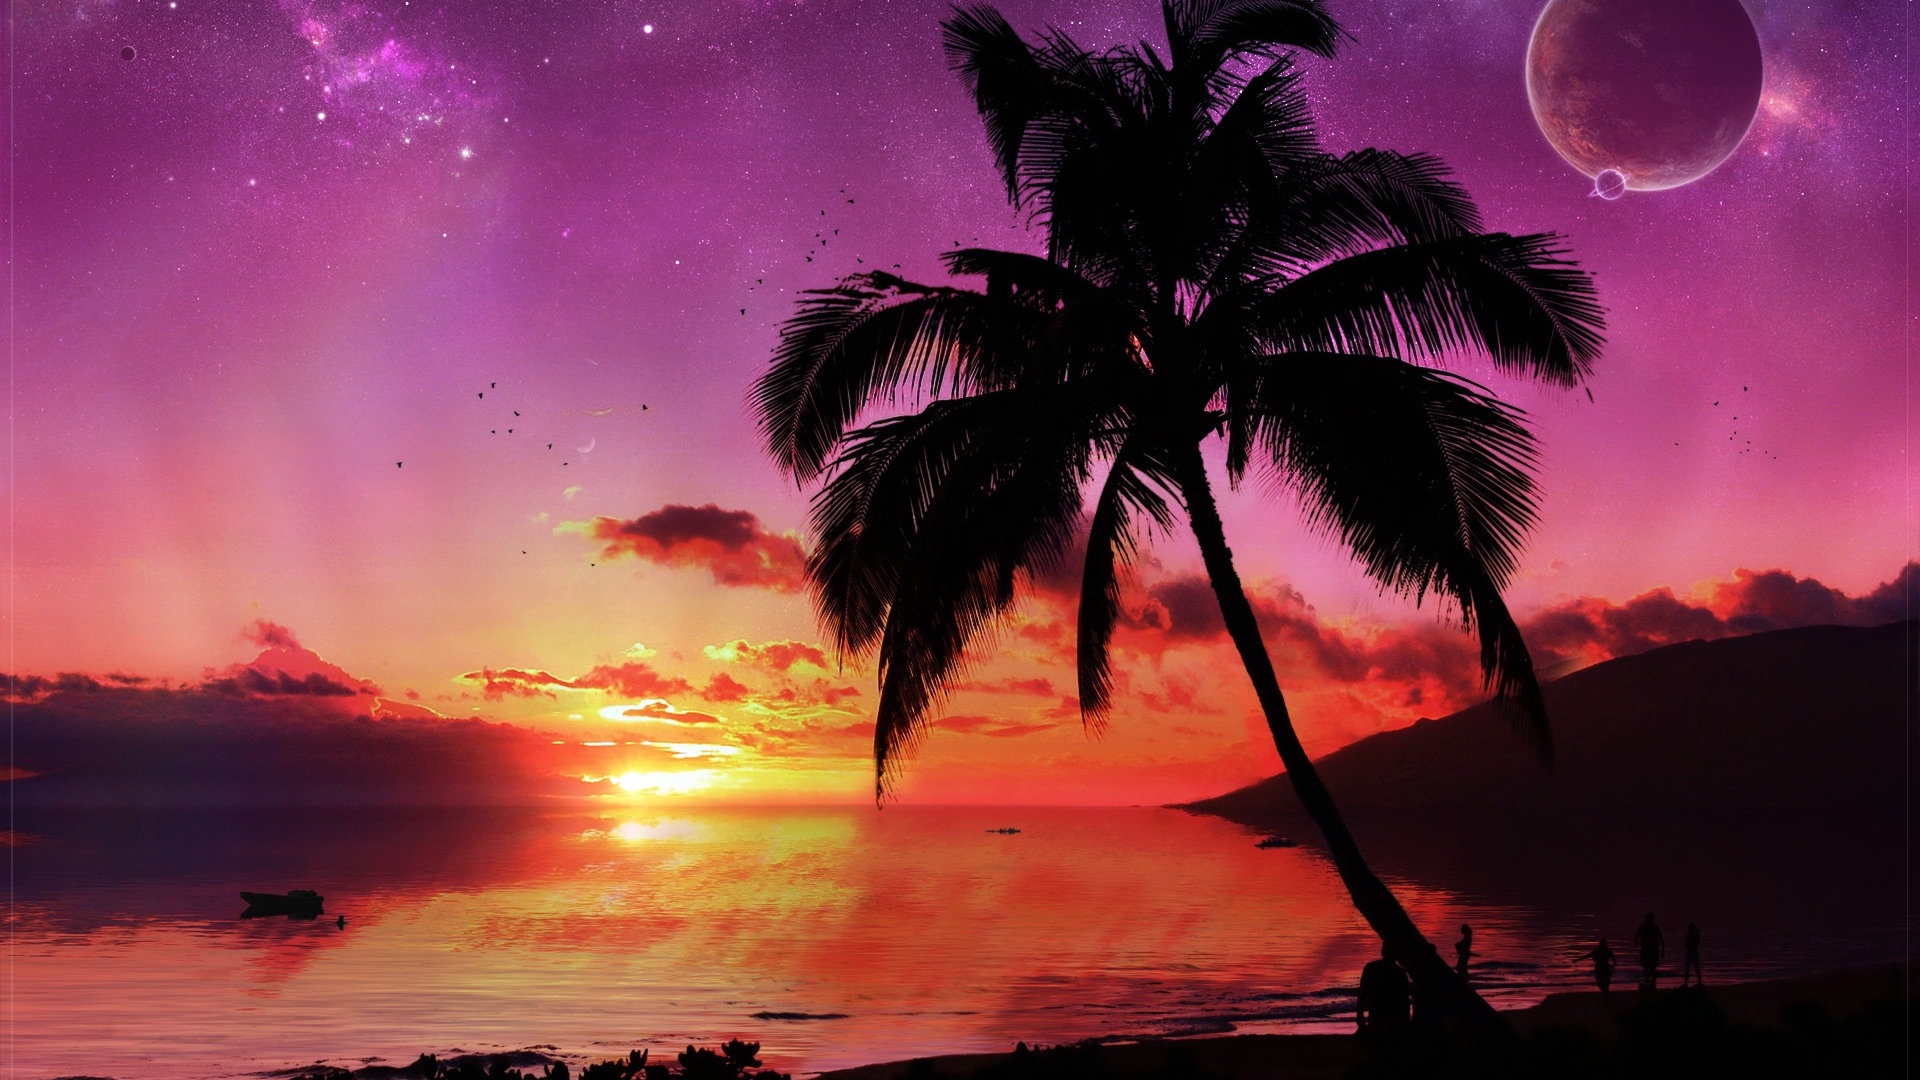 Download - Tropical Beach Paradise Sunset , HD Wallpaper & Backgrounds